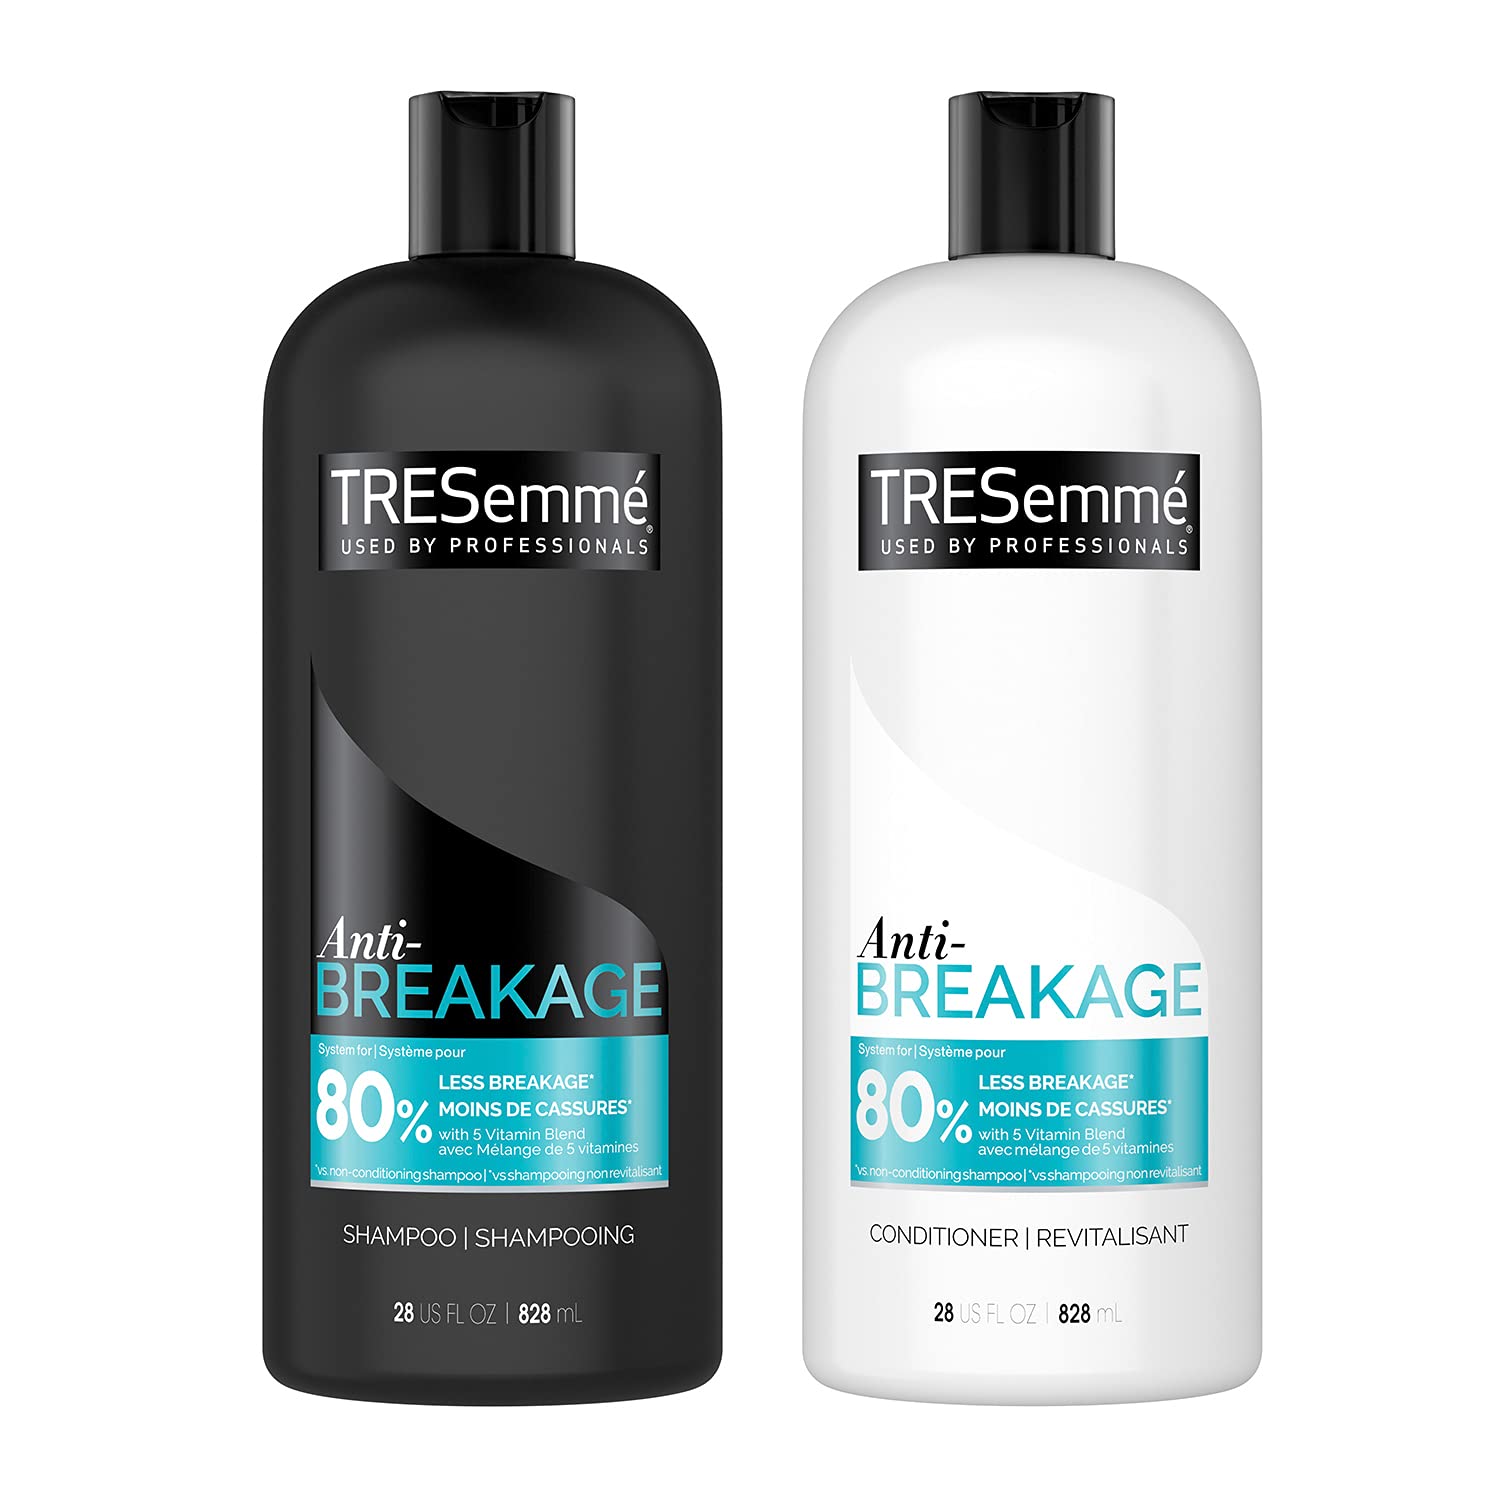 Mua TRESemme Anti Breakage Shampoo and Conditioner Set, Promotes Healthy Hair  Growth, Reduces Dry Hair Breakage Up to 80%*, Vitamin E, Vitamin B12 and  Gelatin, 28 Fl Oz Each trên Amazon Mỹ